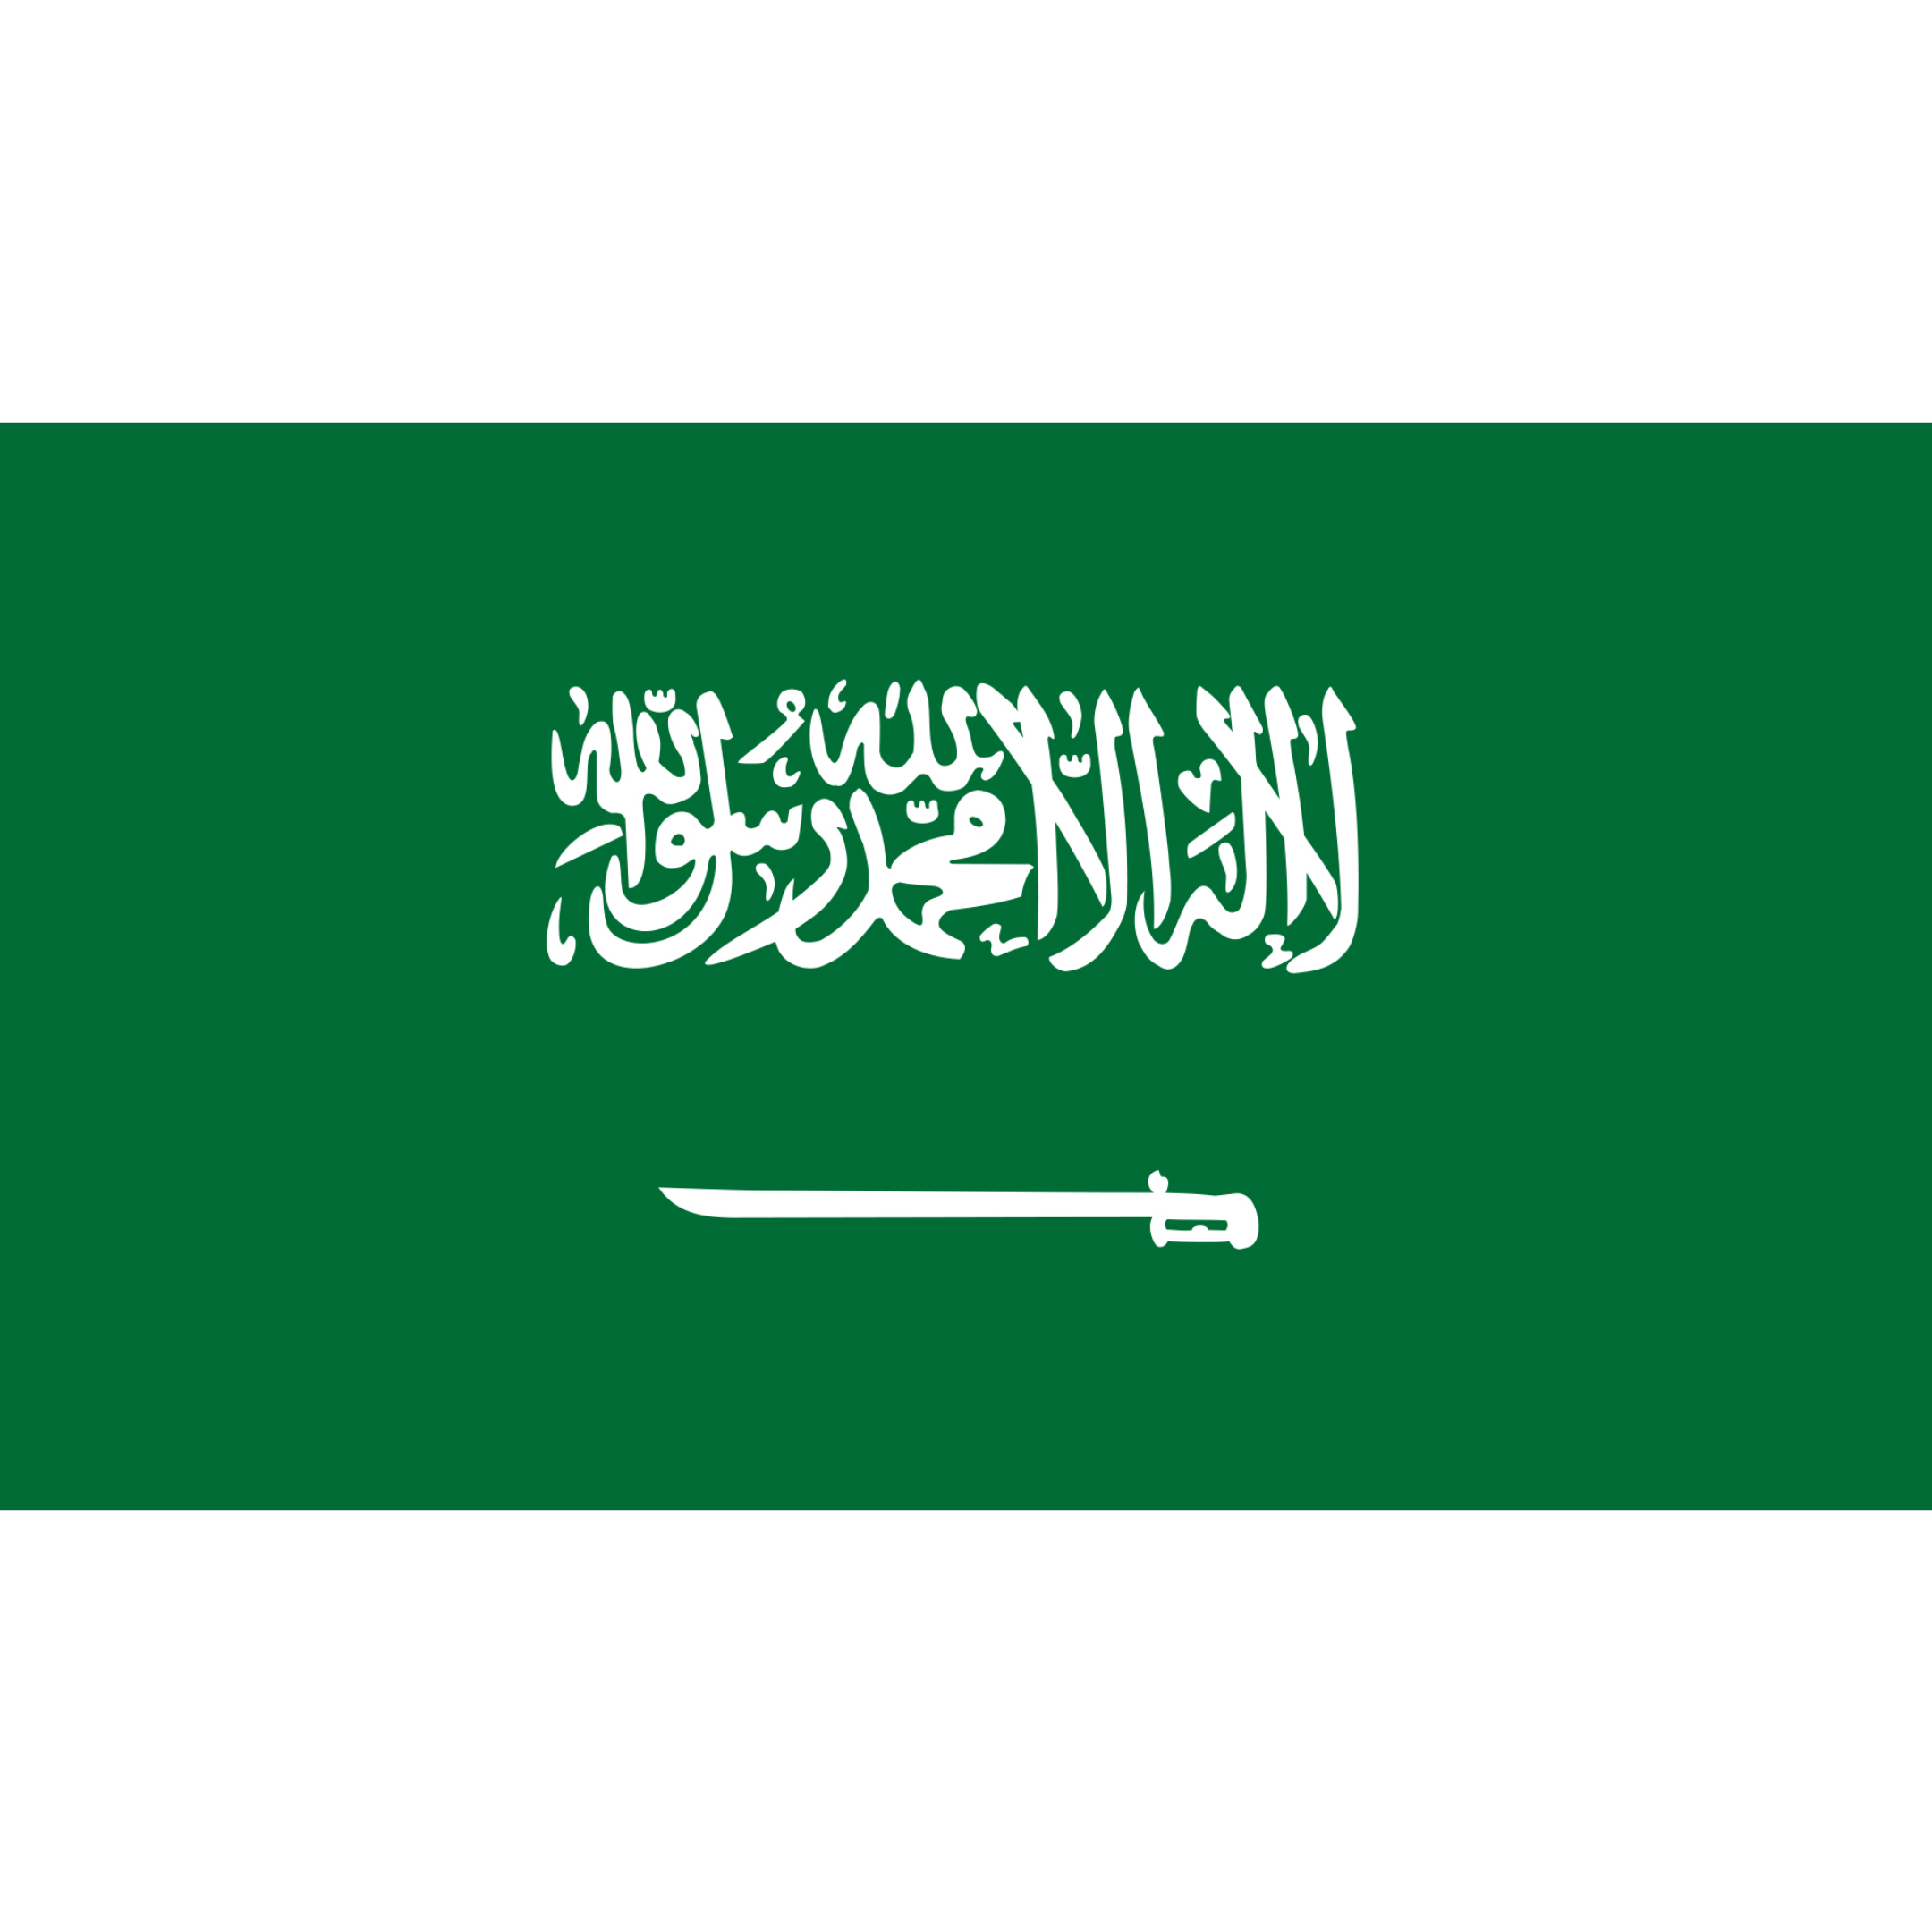 The flag of Saudi Arabia has a green background featuring an Arabic inscription above a sword in white.